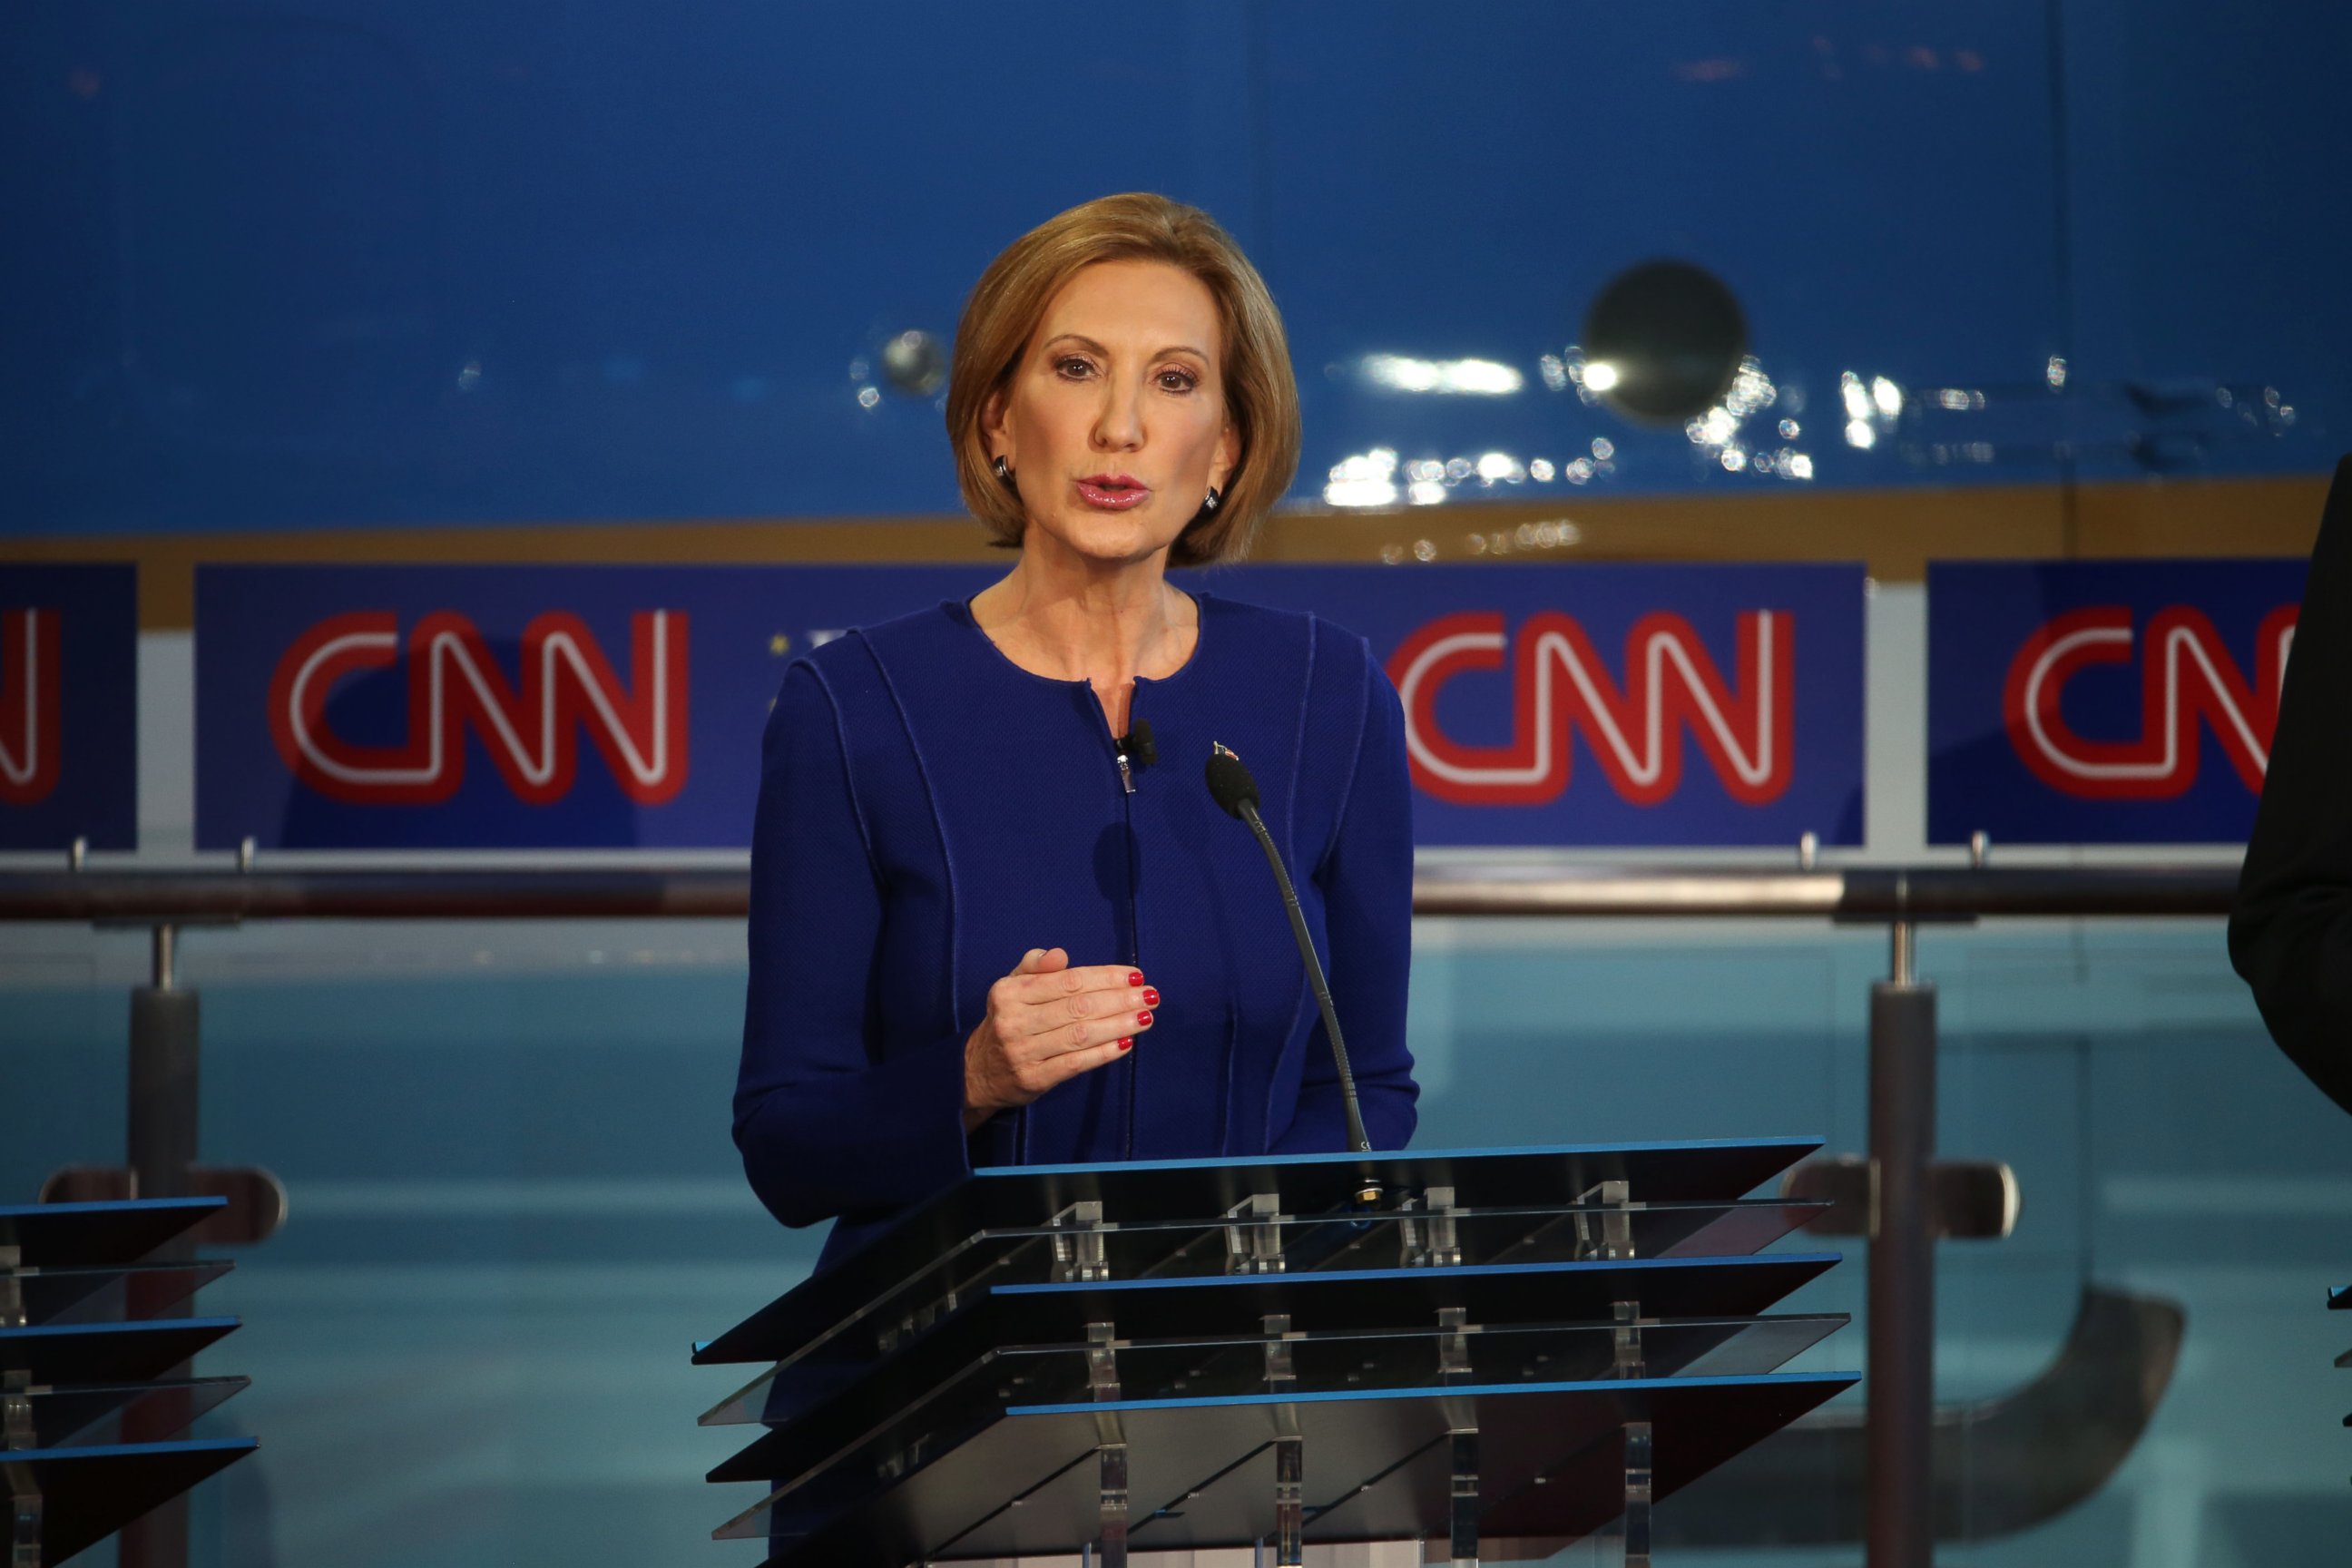 PHOTO:Carly Fiorina takes part in the presidential debates at the Reagan Library, Sept. 16, 2015, in Simi Valley, Calif.  